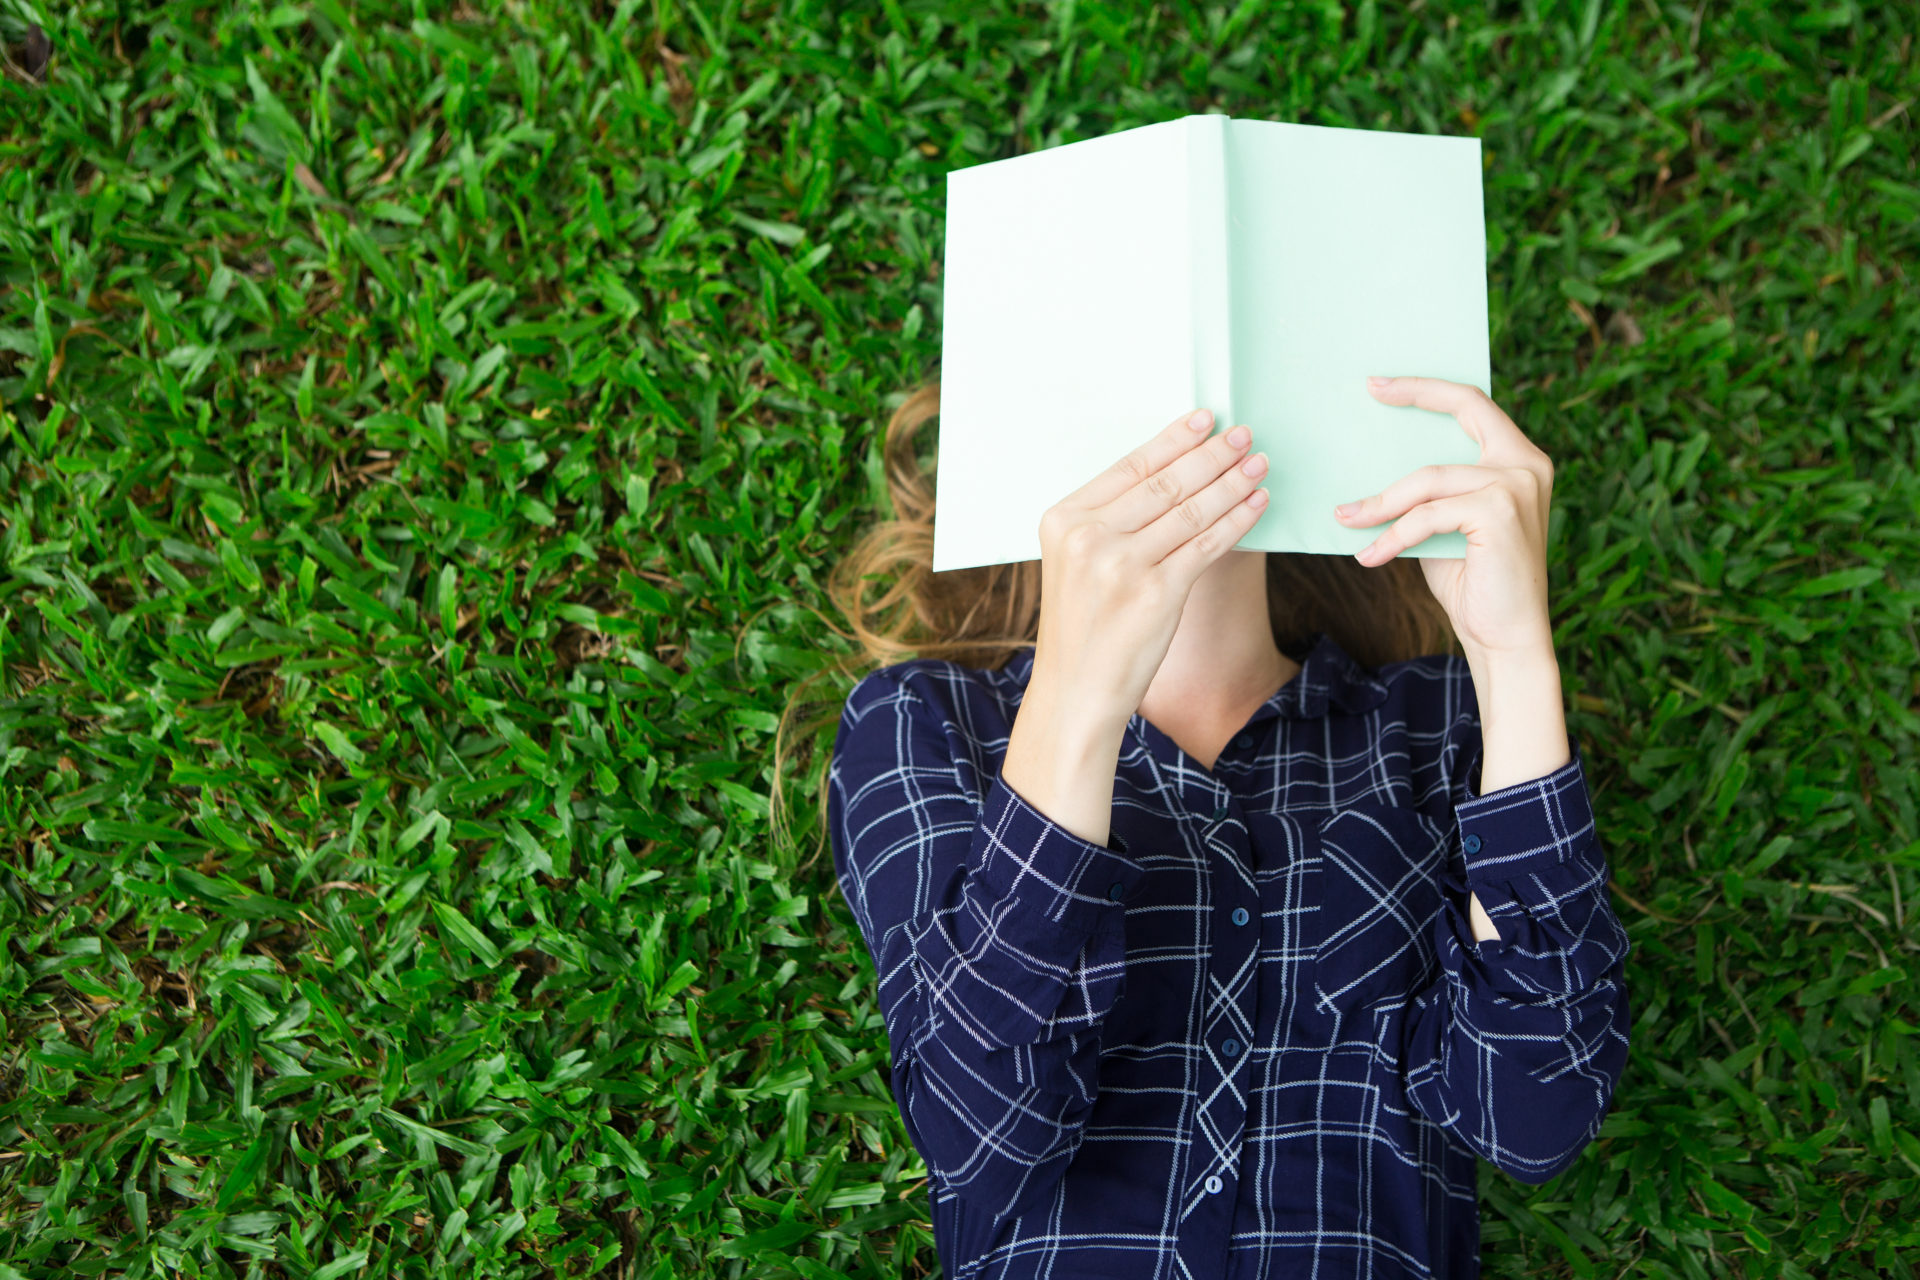 Add These Picks to Your Summer Reading List